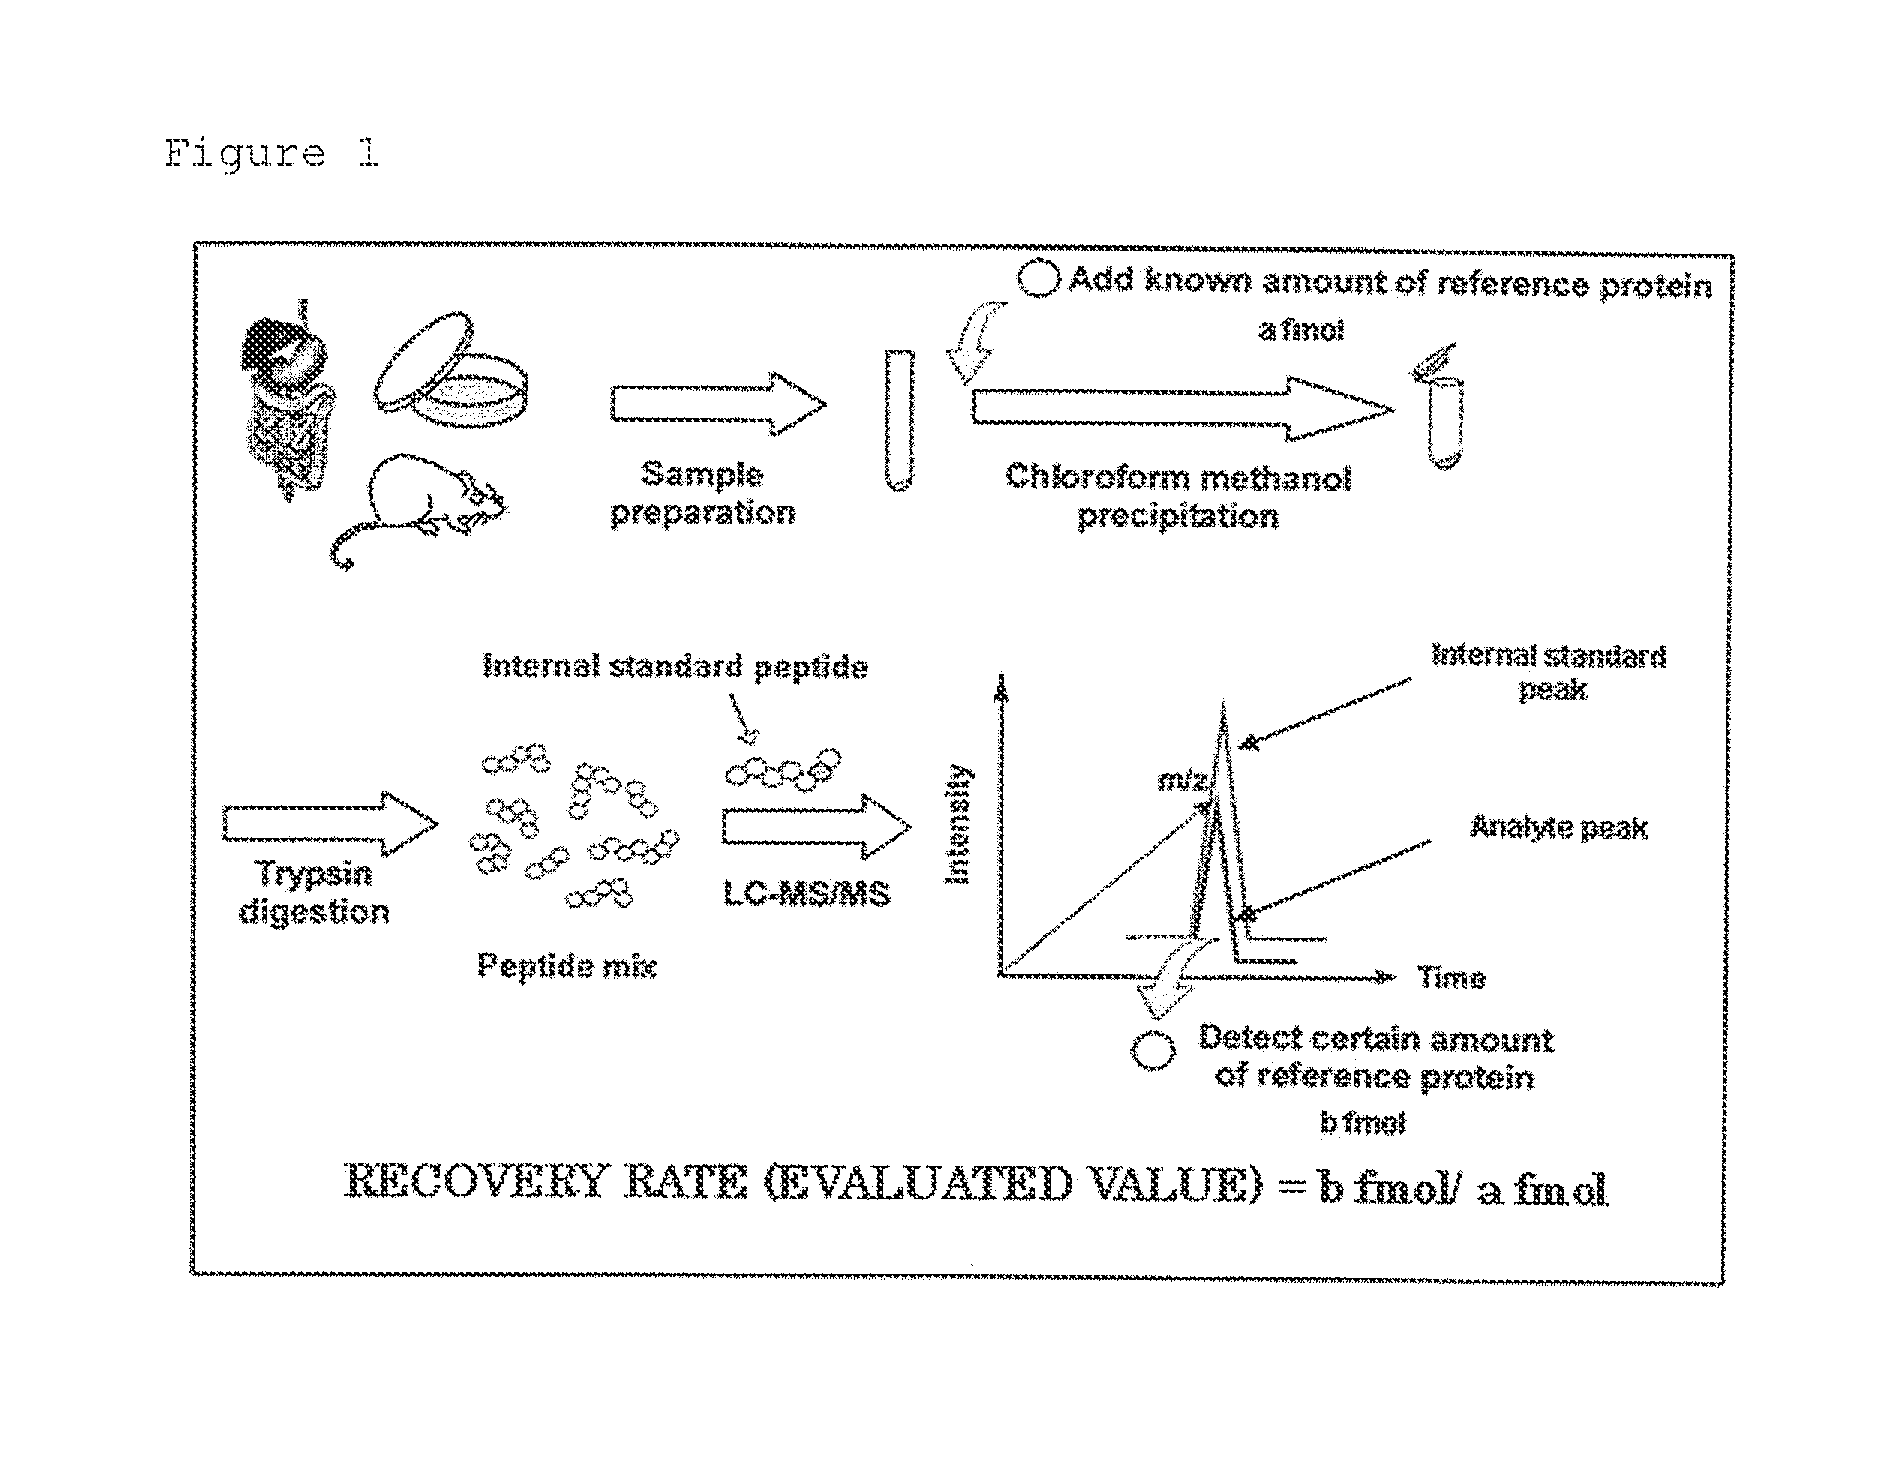 Evaluation peptide for use in quantification of protein using mass spectrometer, artificial standard protein, and method for quantifying protein